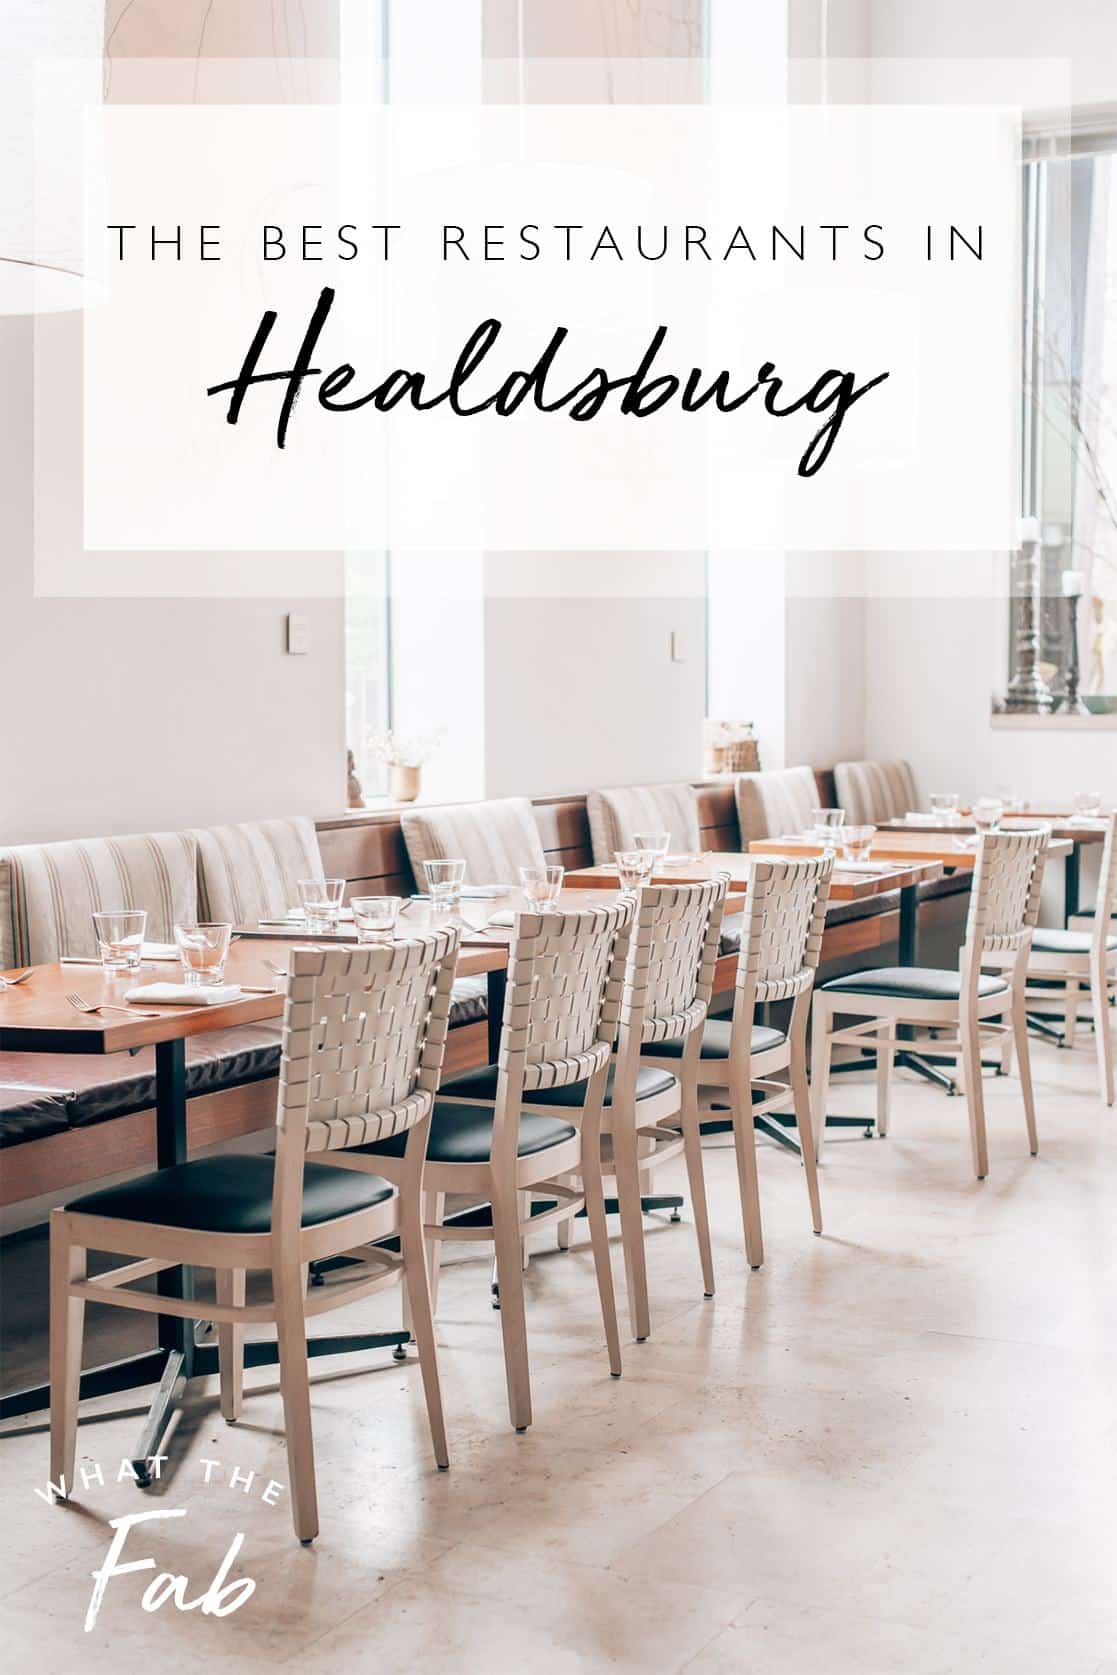 The best restaurants in Healdsburg, by travel blogger What The Fab